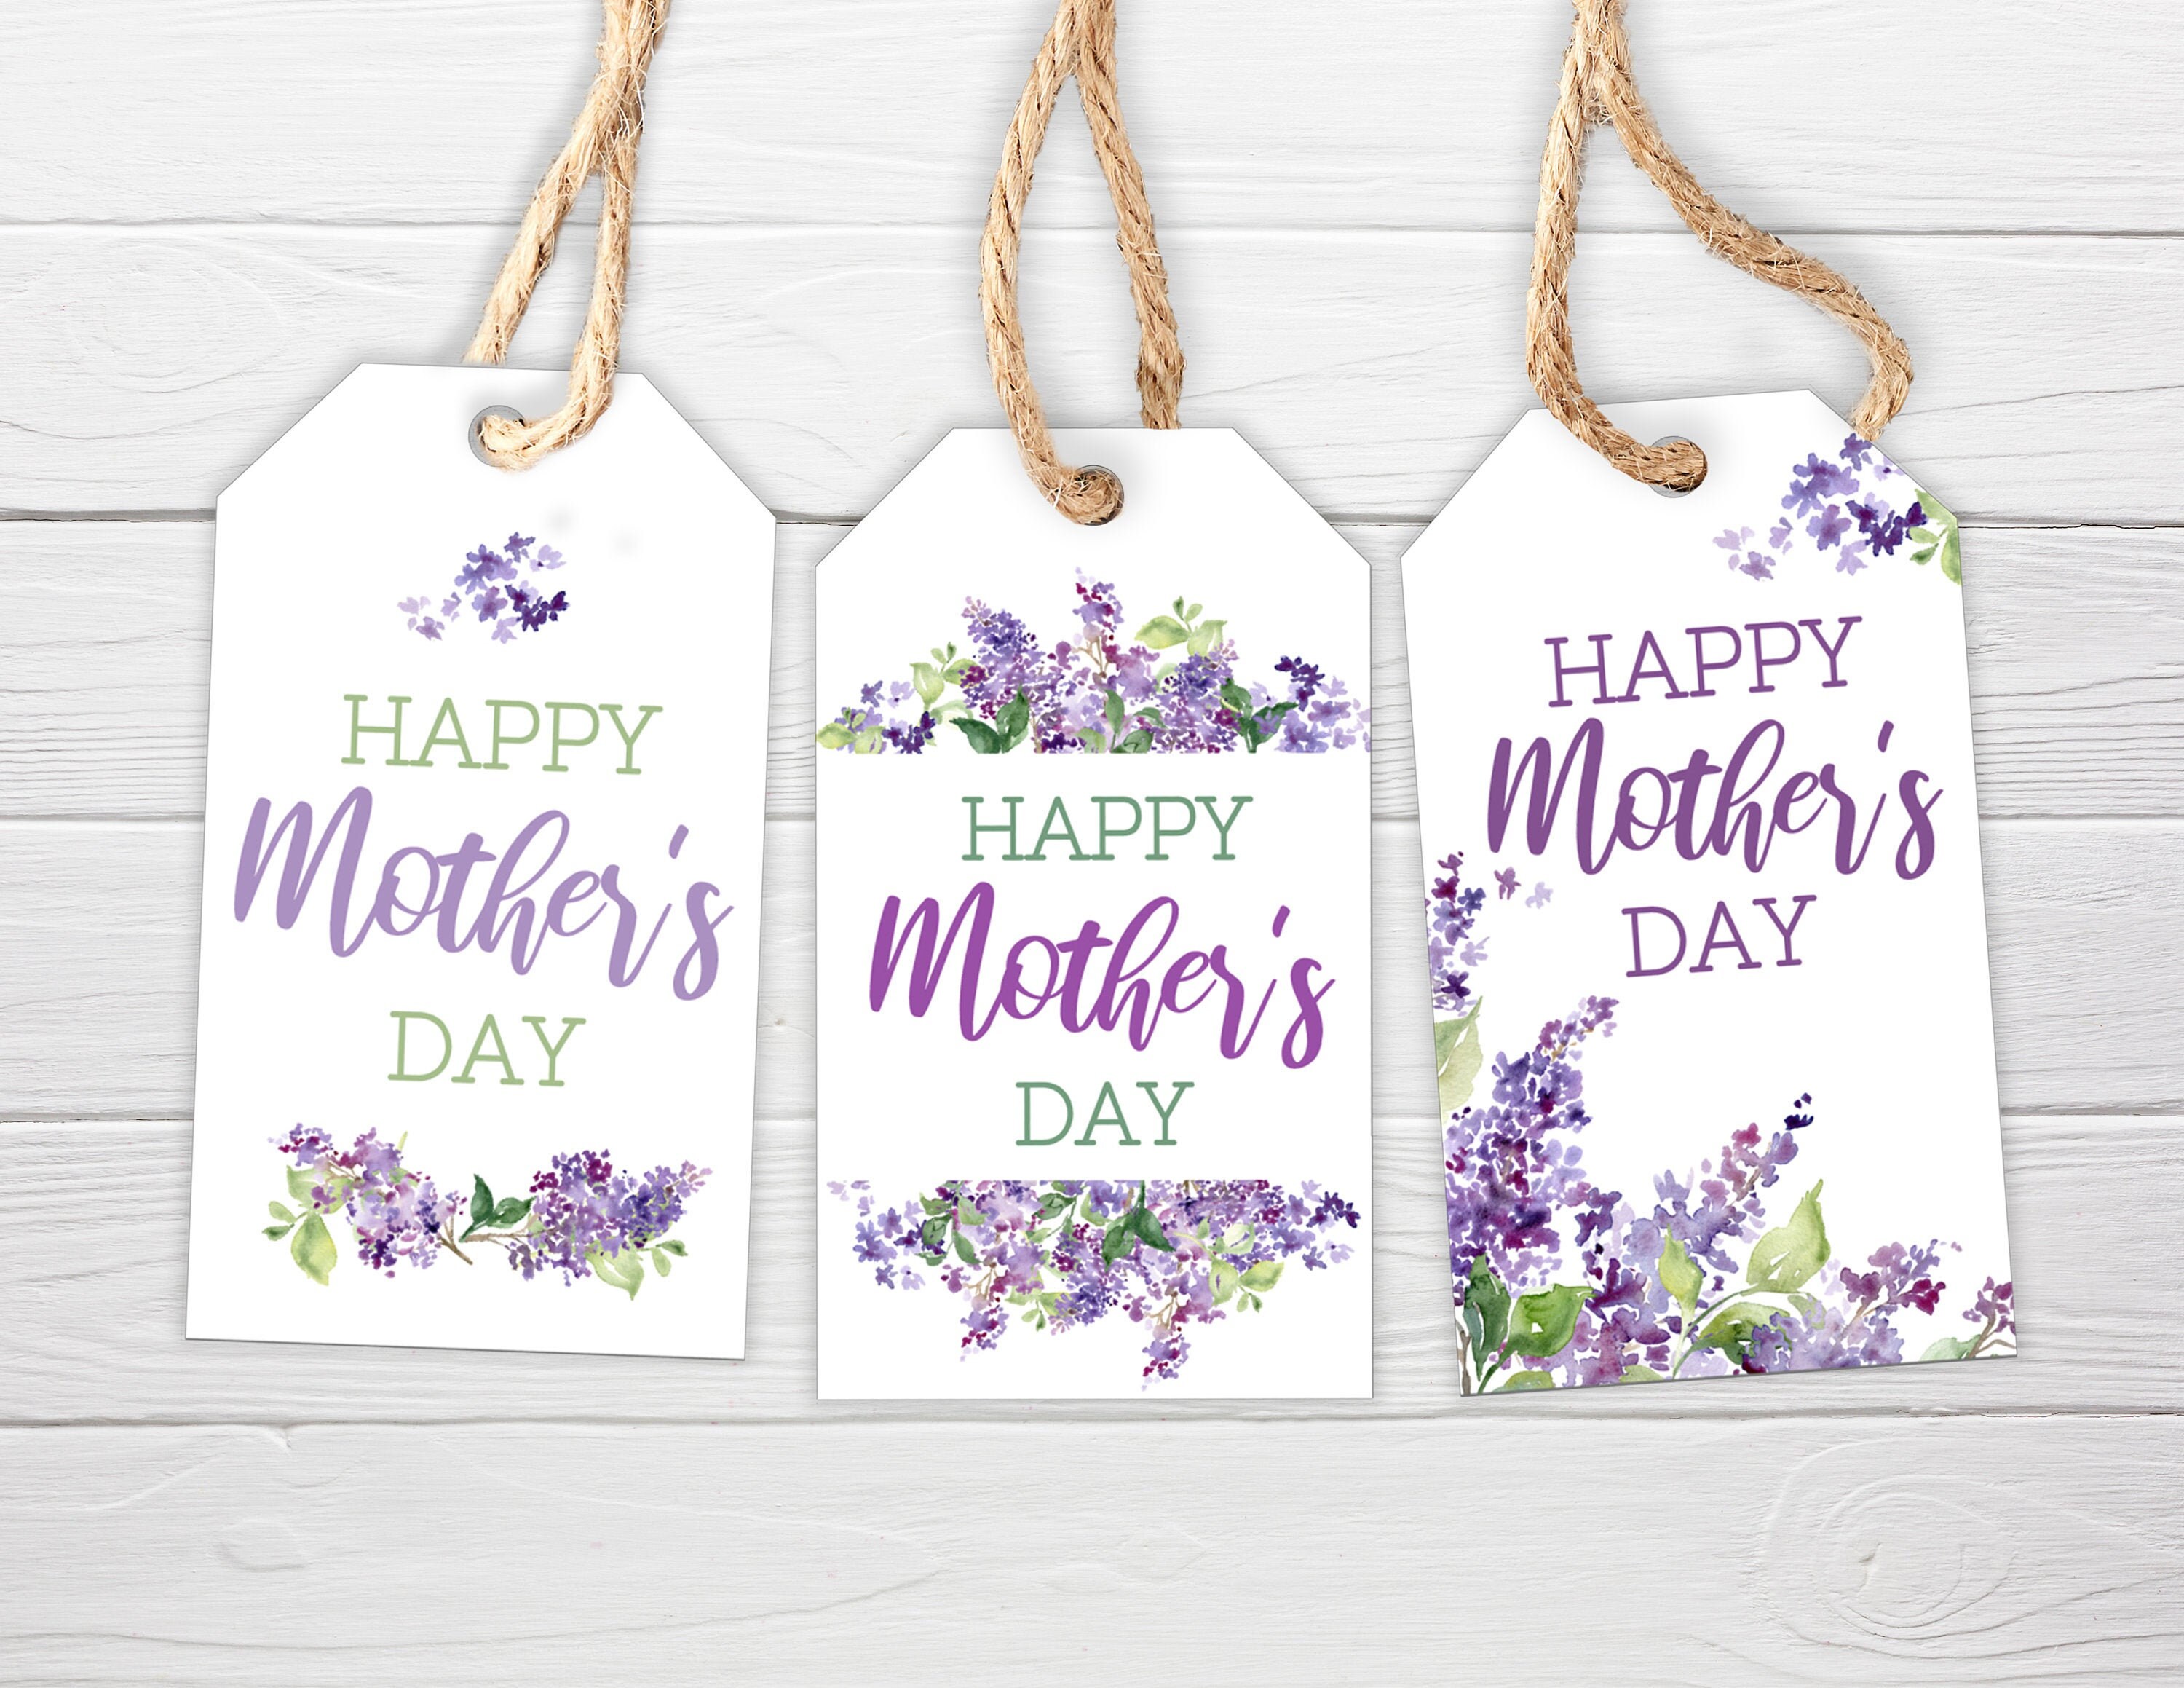 5 Senses Gift Tags, Cards & Ideas for Moms Gift for Mom Mother's Day Gift  Birthday Gift for Mom Valentine's Day Gift for Mom 